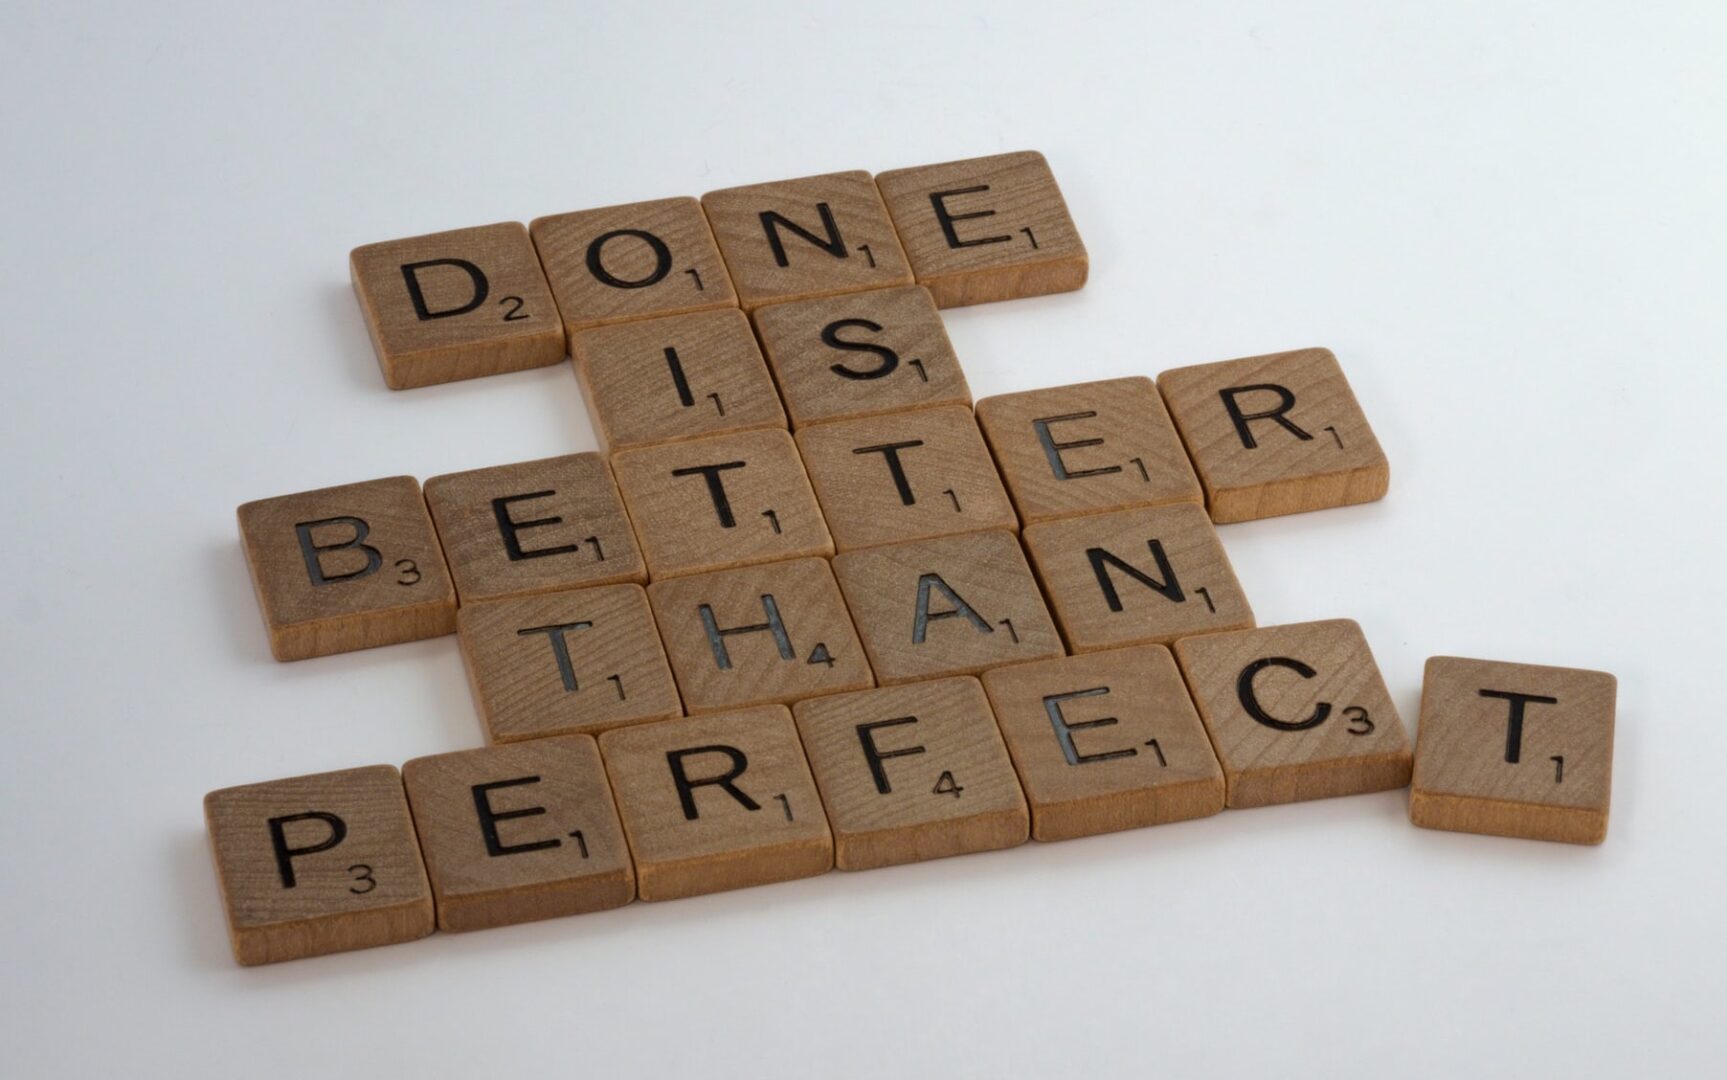 A word game with scrabble tiles that say " done is better than perfect ".